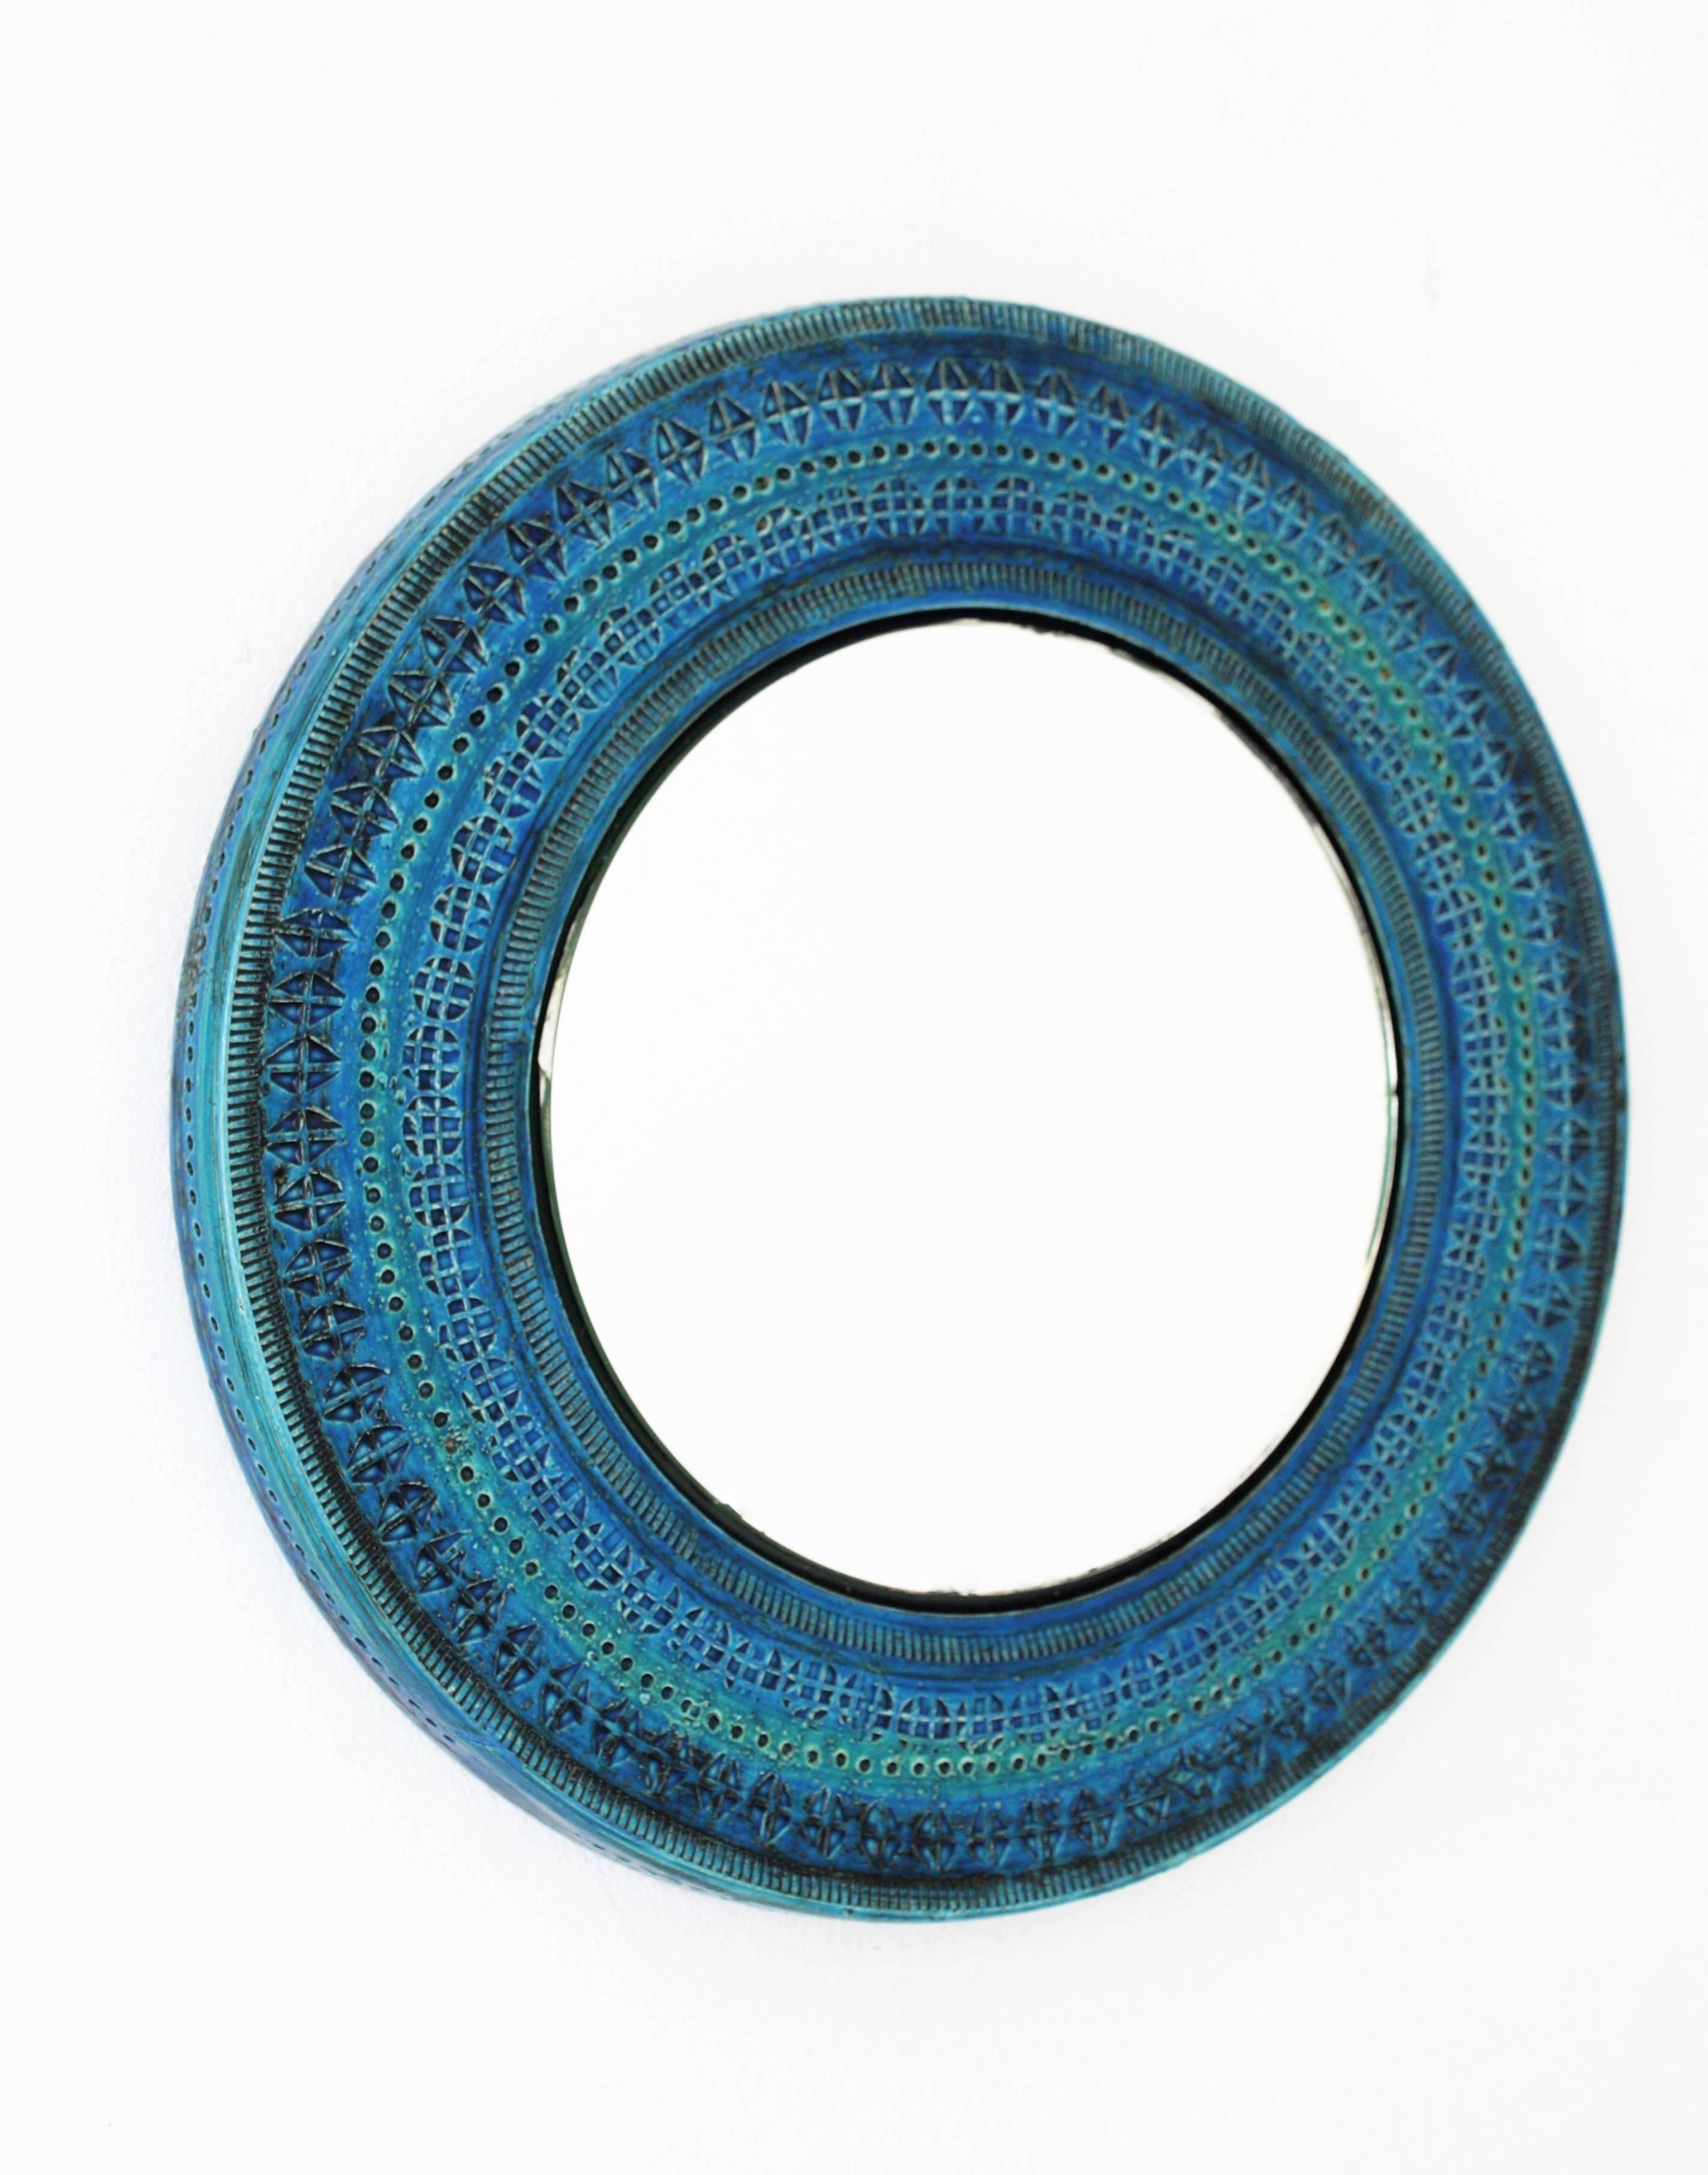 Italian handcrafted blue terracotta glazed ceramic mirror with hand-carved geometric designs in a vibrant turquoise and cobalt blue colors. Rimini blue collection designed by Aldo Londi for Bitossi, Italy, 1960s. Glass dimensions: 21.5cm